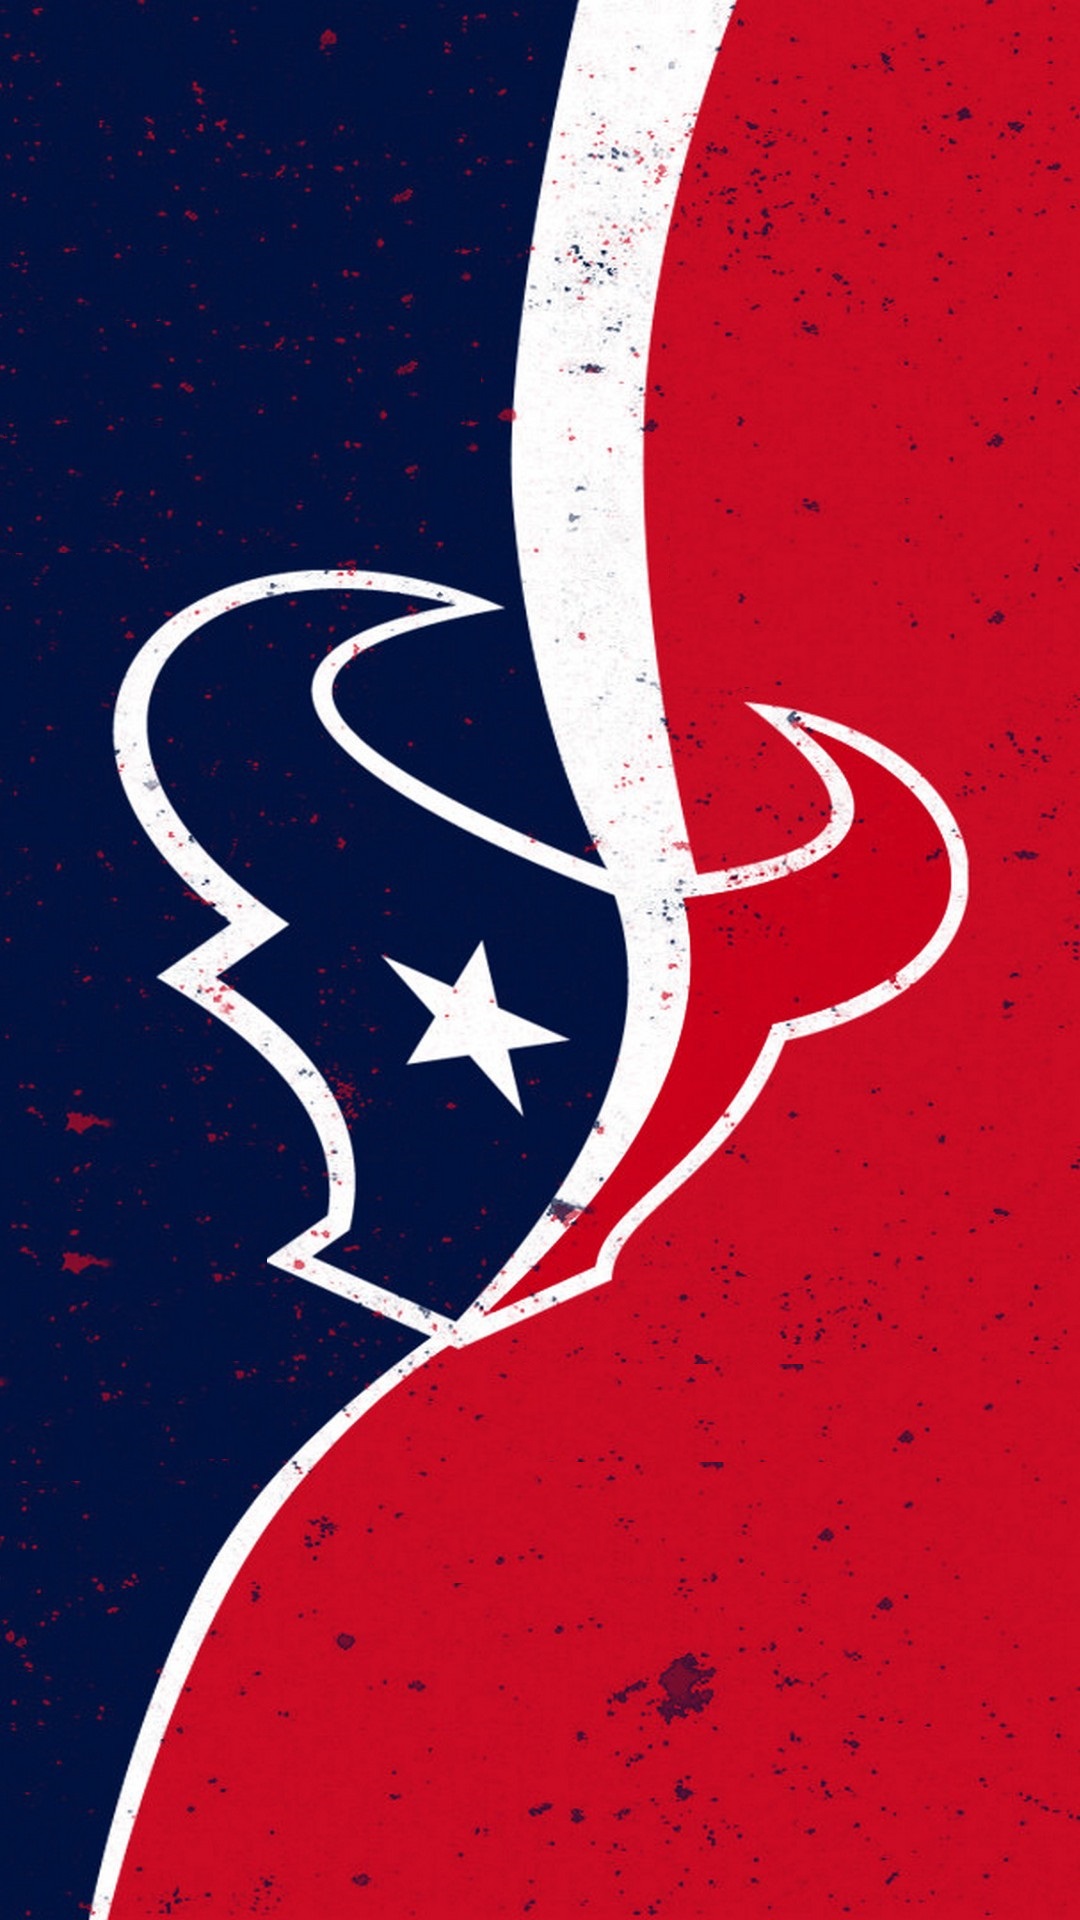 Houston Texans iPhone Wallpaper with high-resolution 1080x1920 pixel. Download and set as wallpaper for Apple iPhone X, XS Max, XR, 8, 7, 6, SE, iPad, Android